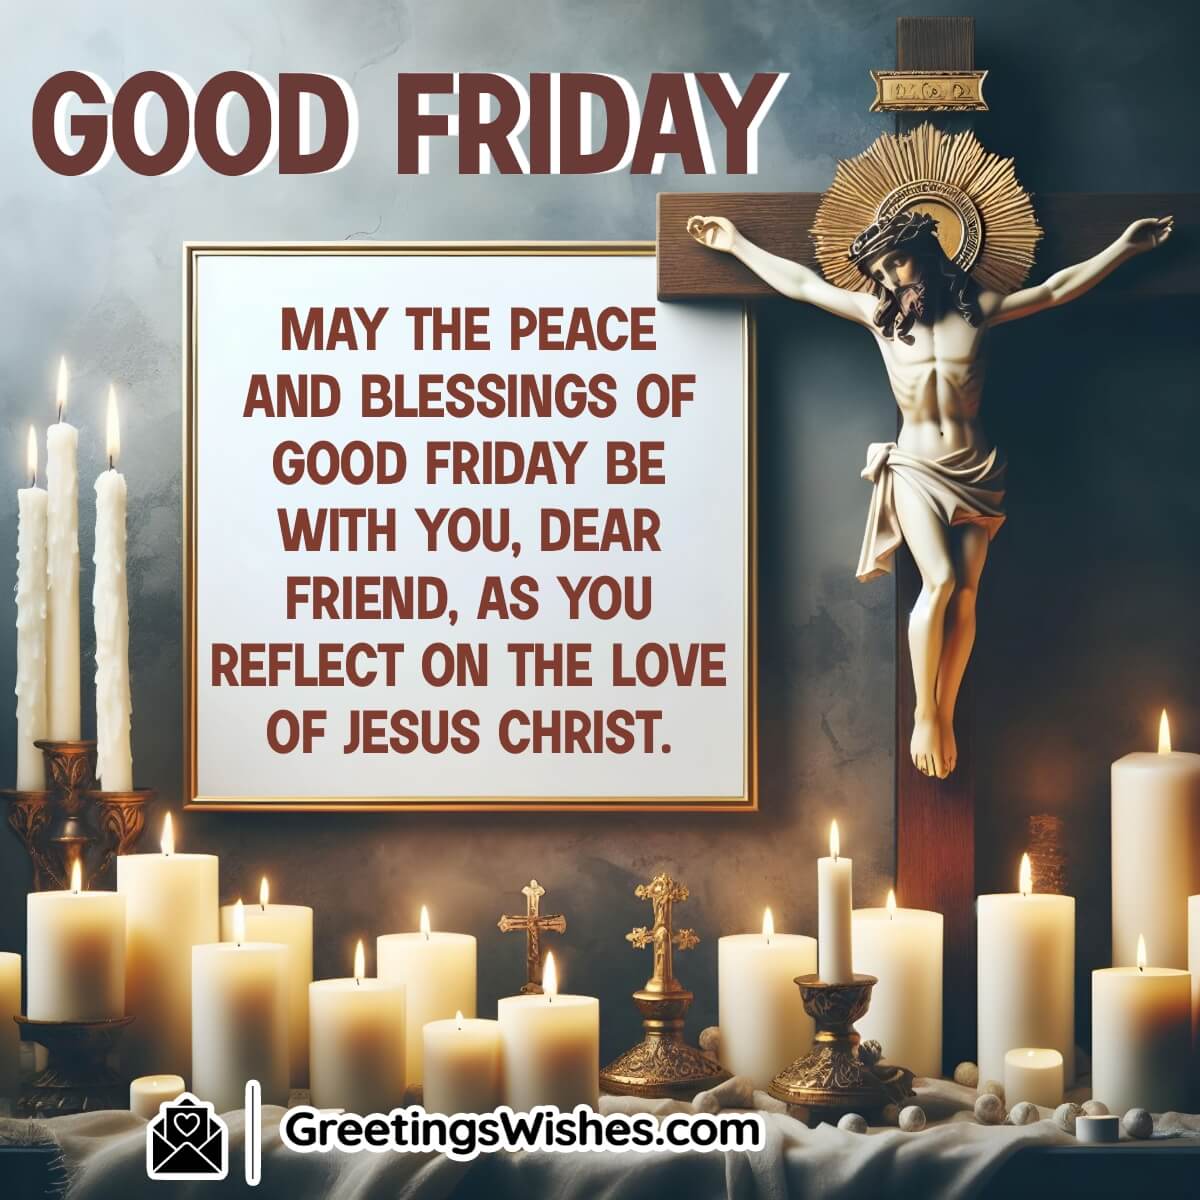 Good Friday Wishes For Friends